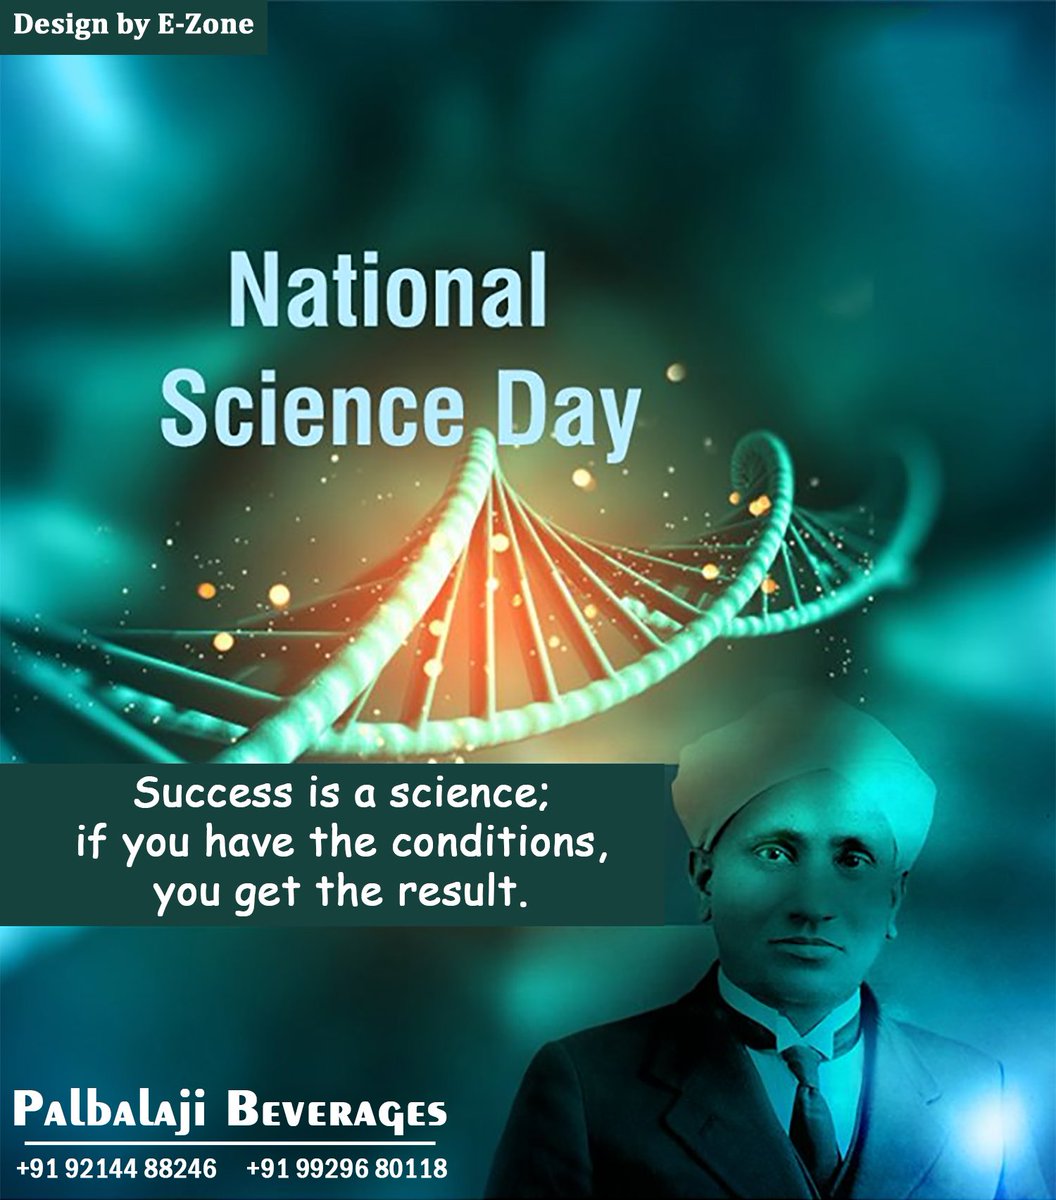 National Science Day / Vector Illustration Banner National Science Day Stock Vector Royalty Free 1008558997 / National science day is celebrated on february 28 each year commemorating indian physicist c v raman's discovery in 1928 of the raman effect, the scattering of photons or light particles by matter.